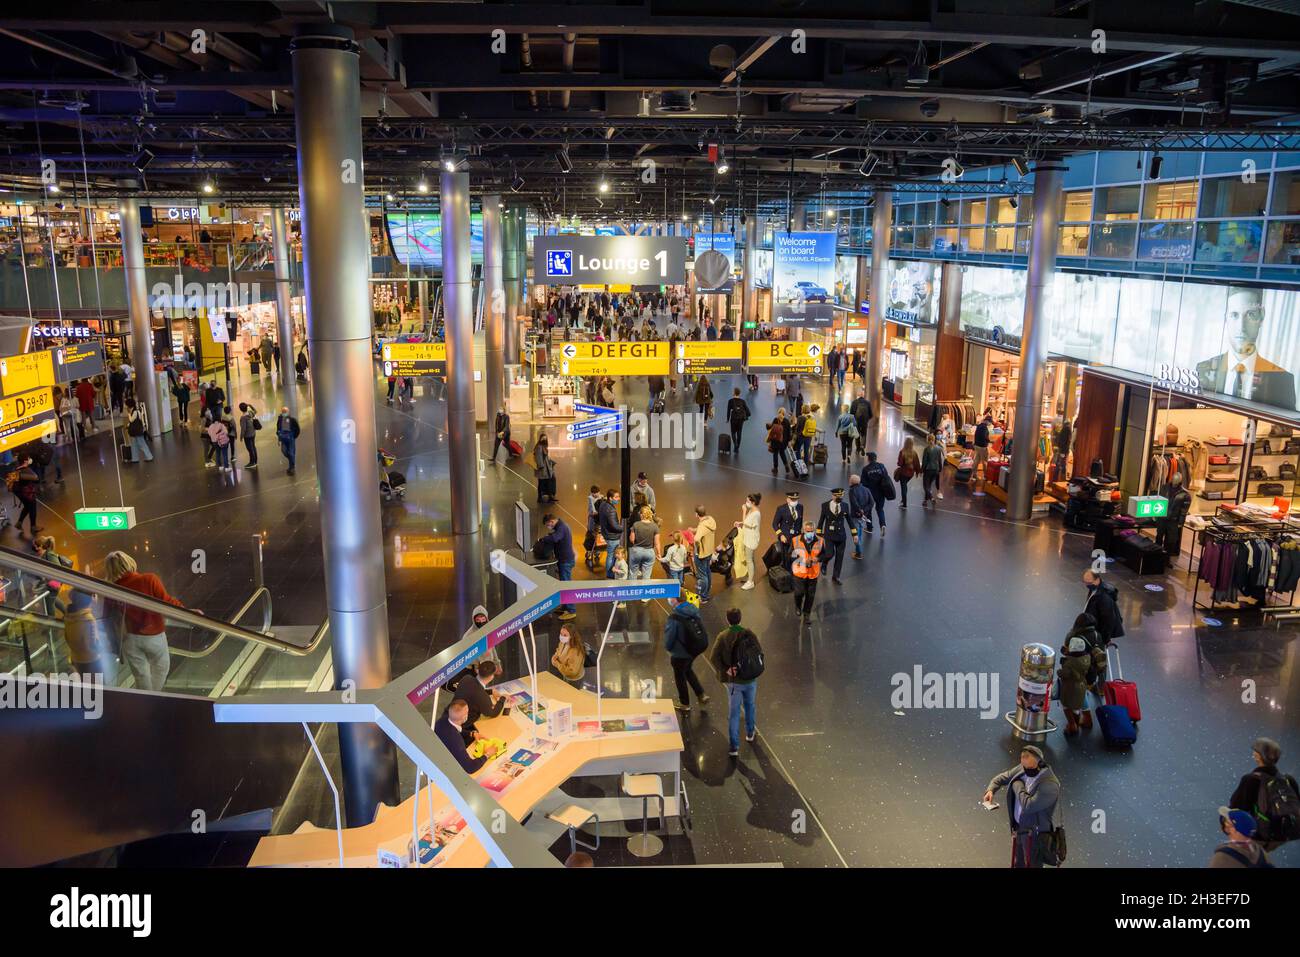 Schiphol Airport, Netherlands - October 17, 2021: Crowed departure lounge lined with shops and restaurant in the Schengen zone of the Terminal Stock Photo